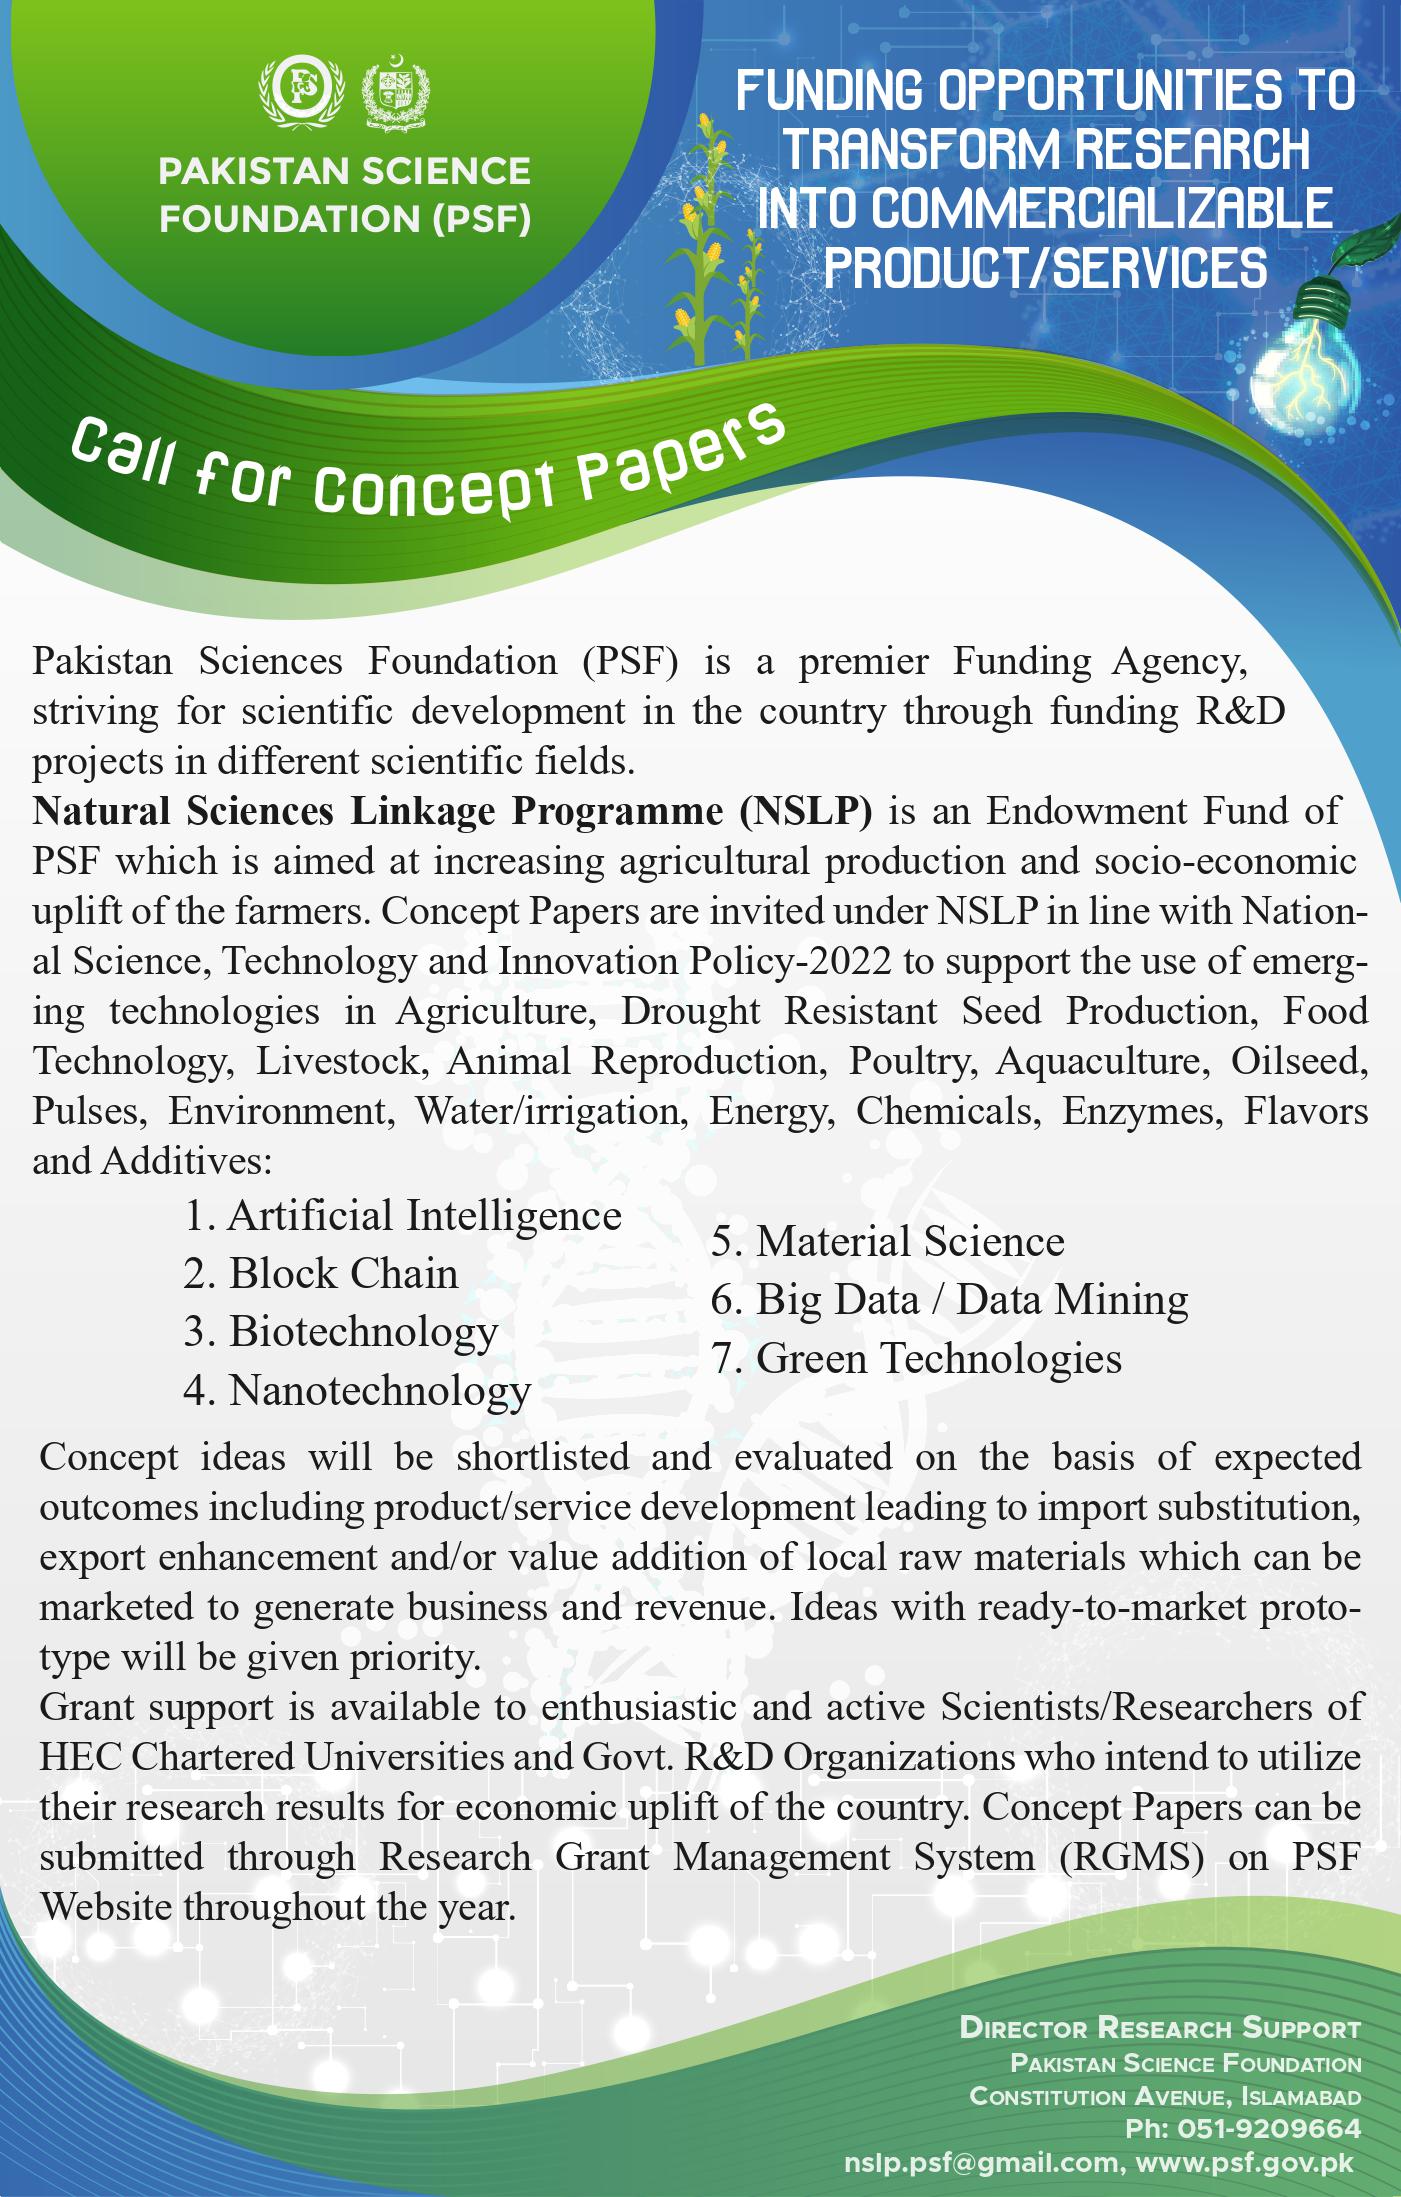 PSF-NATURAL SCIENCES LINKAGE PROGRAMME